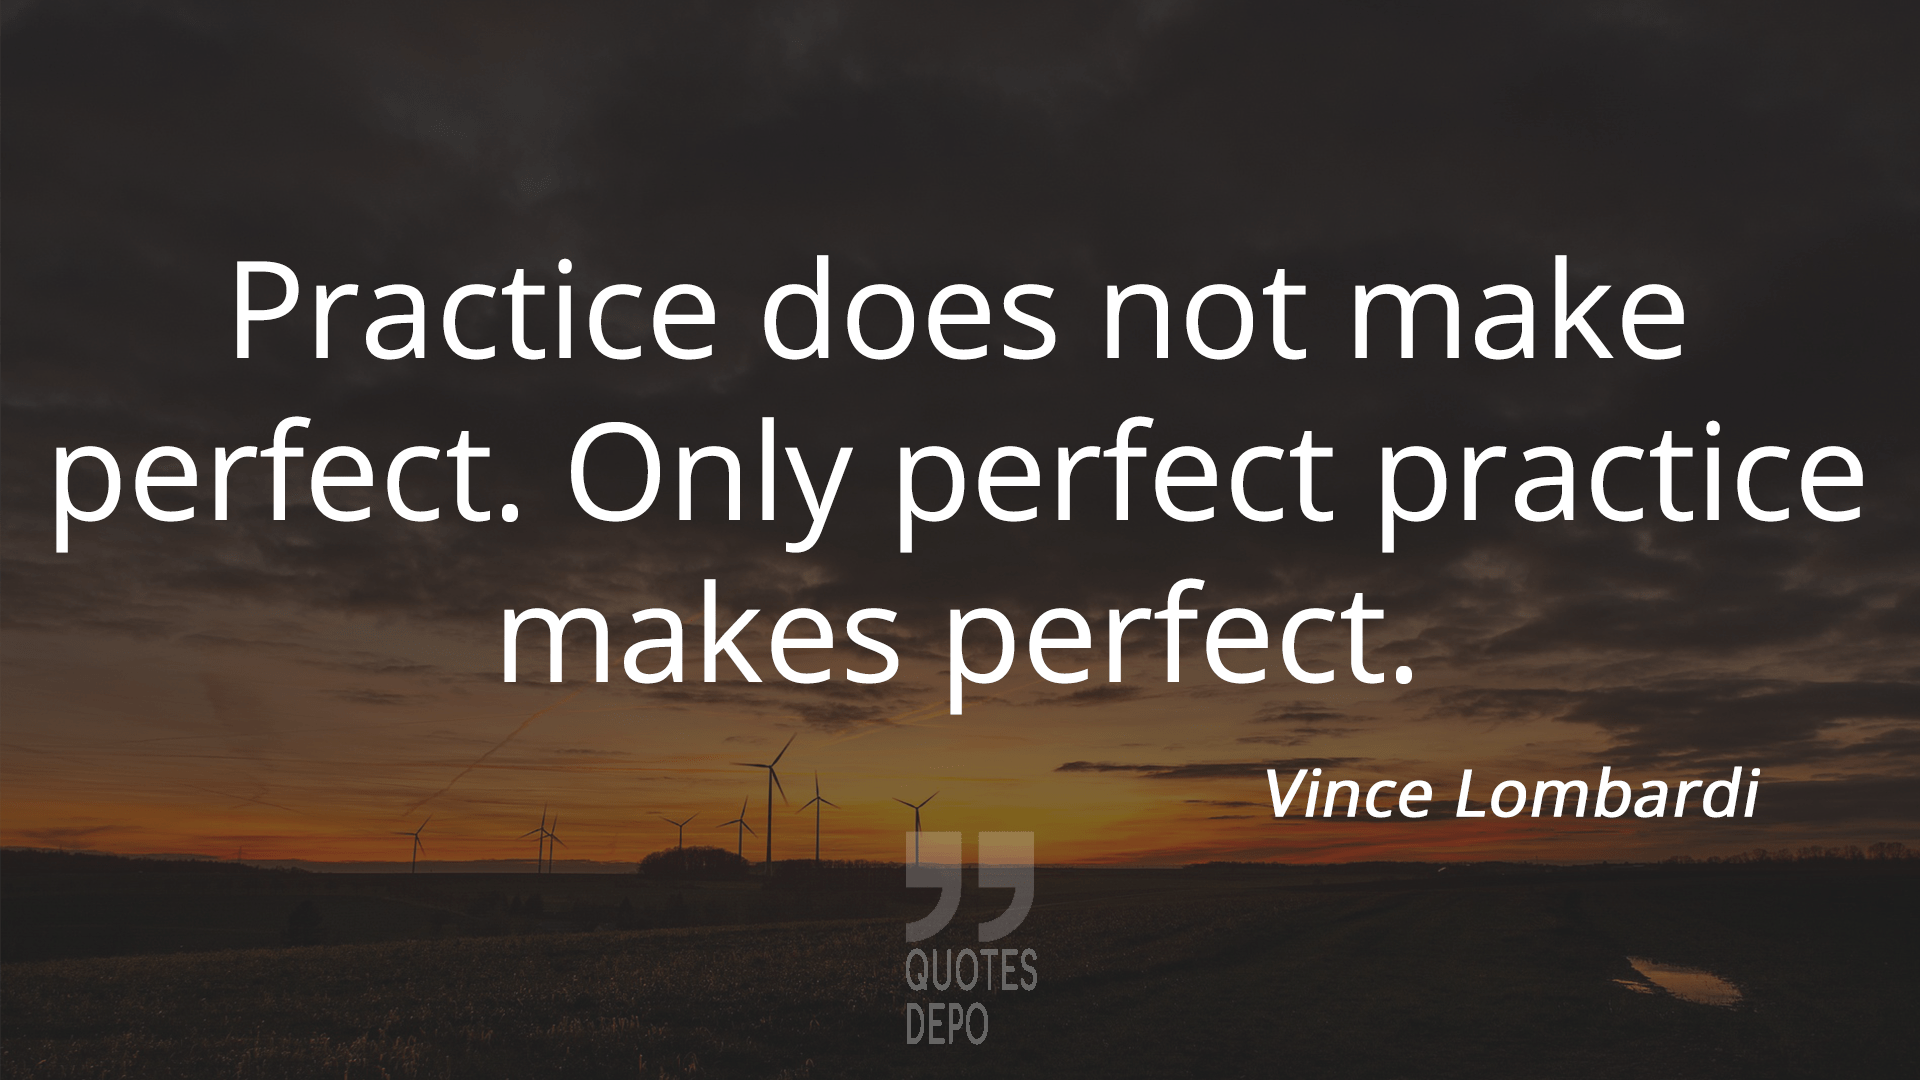 practice does not make perfect - vince lombardi quotes